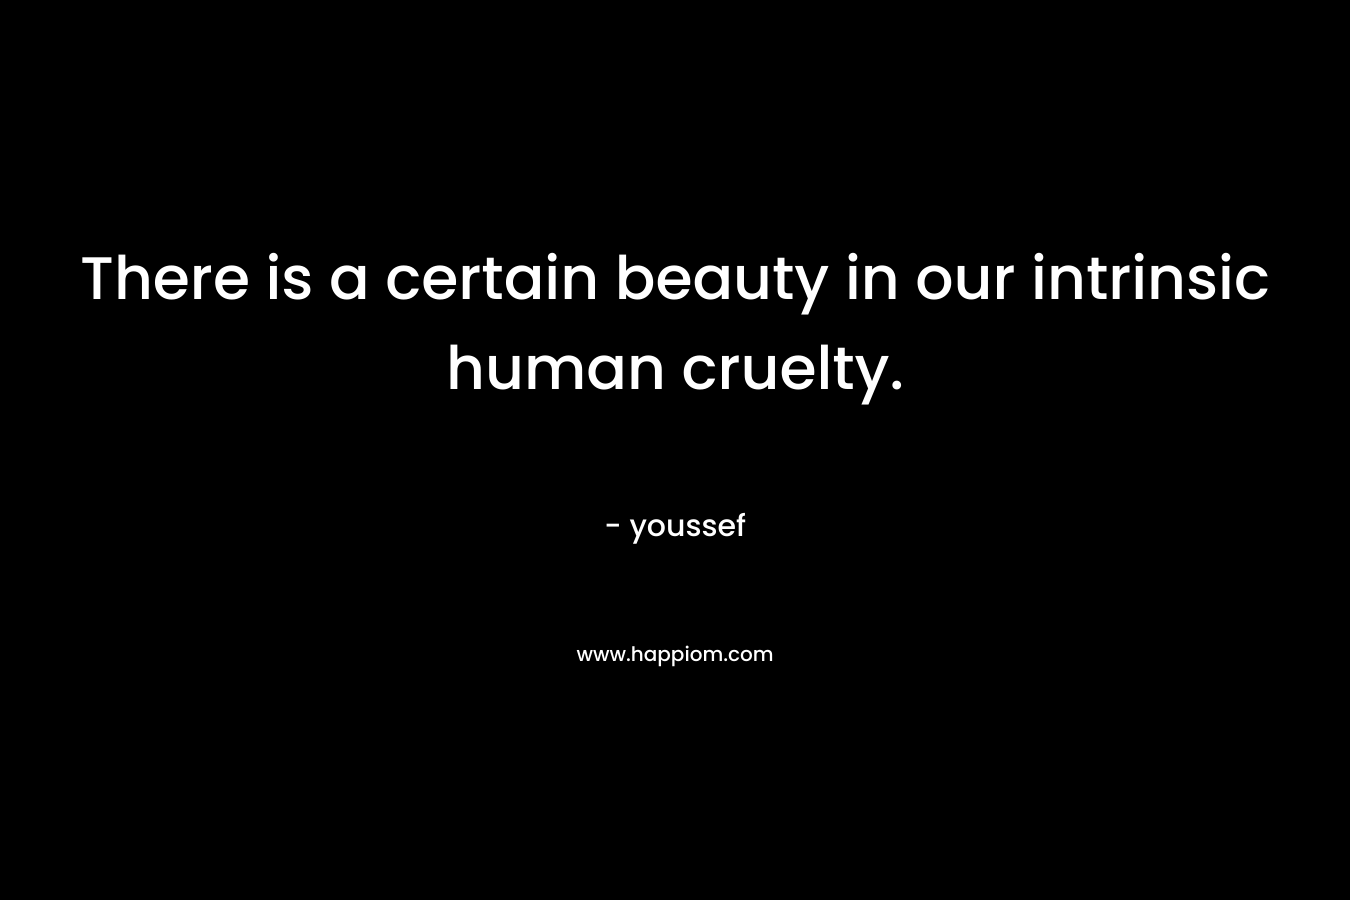 There is a certain beauty in our intrinsic human cruelty.